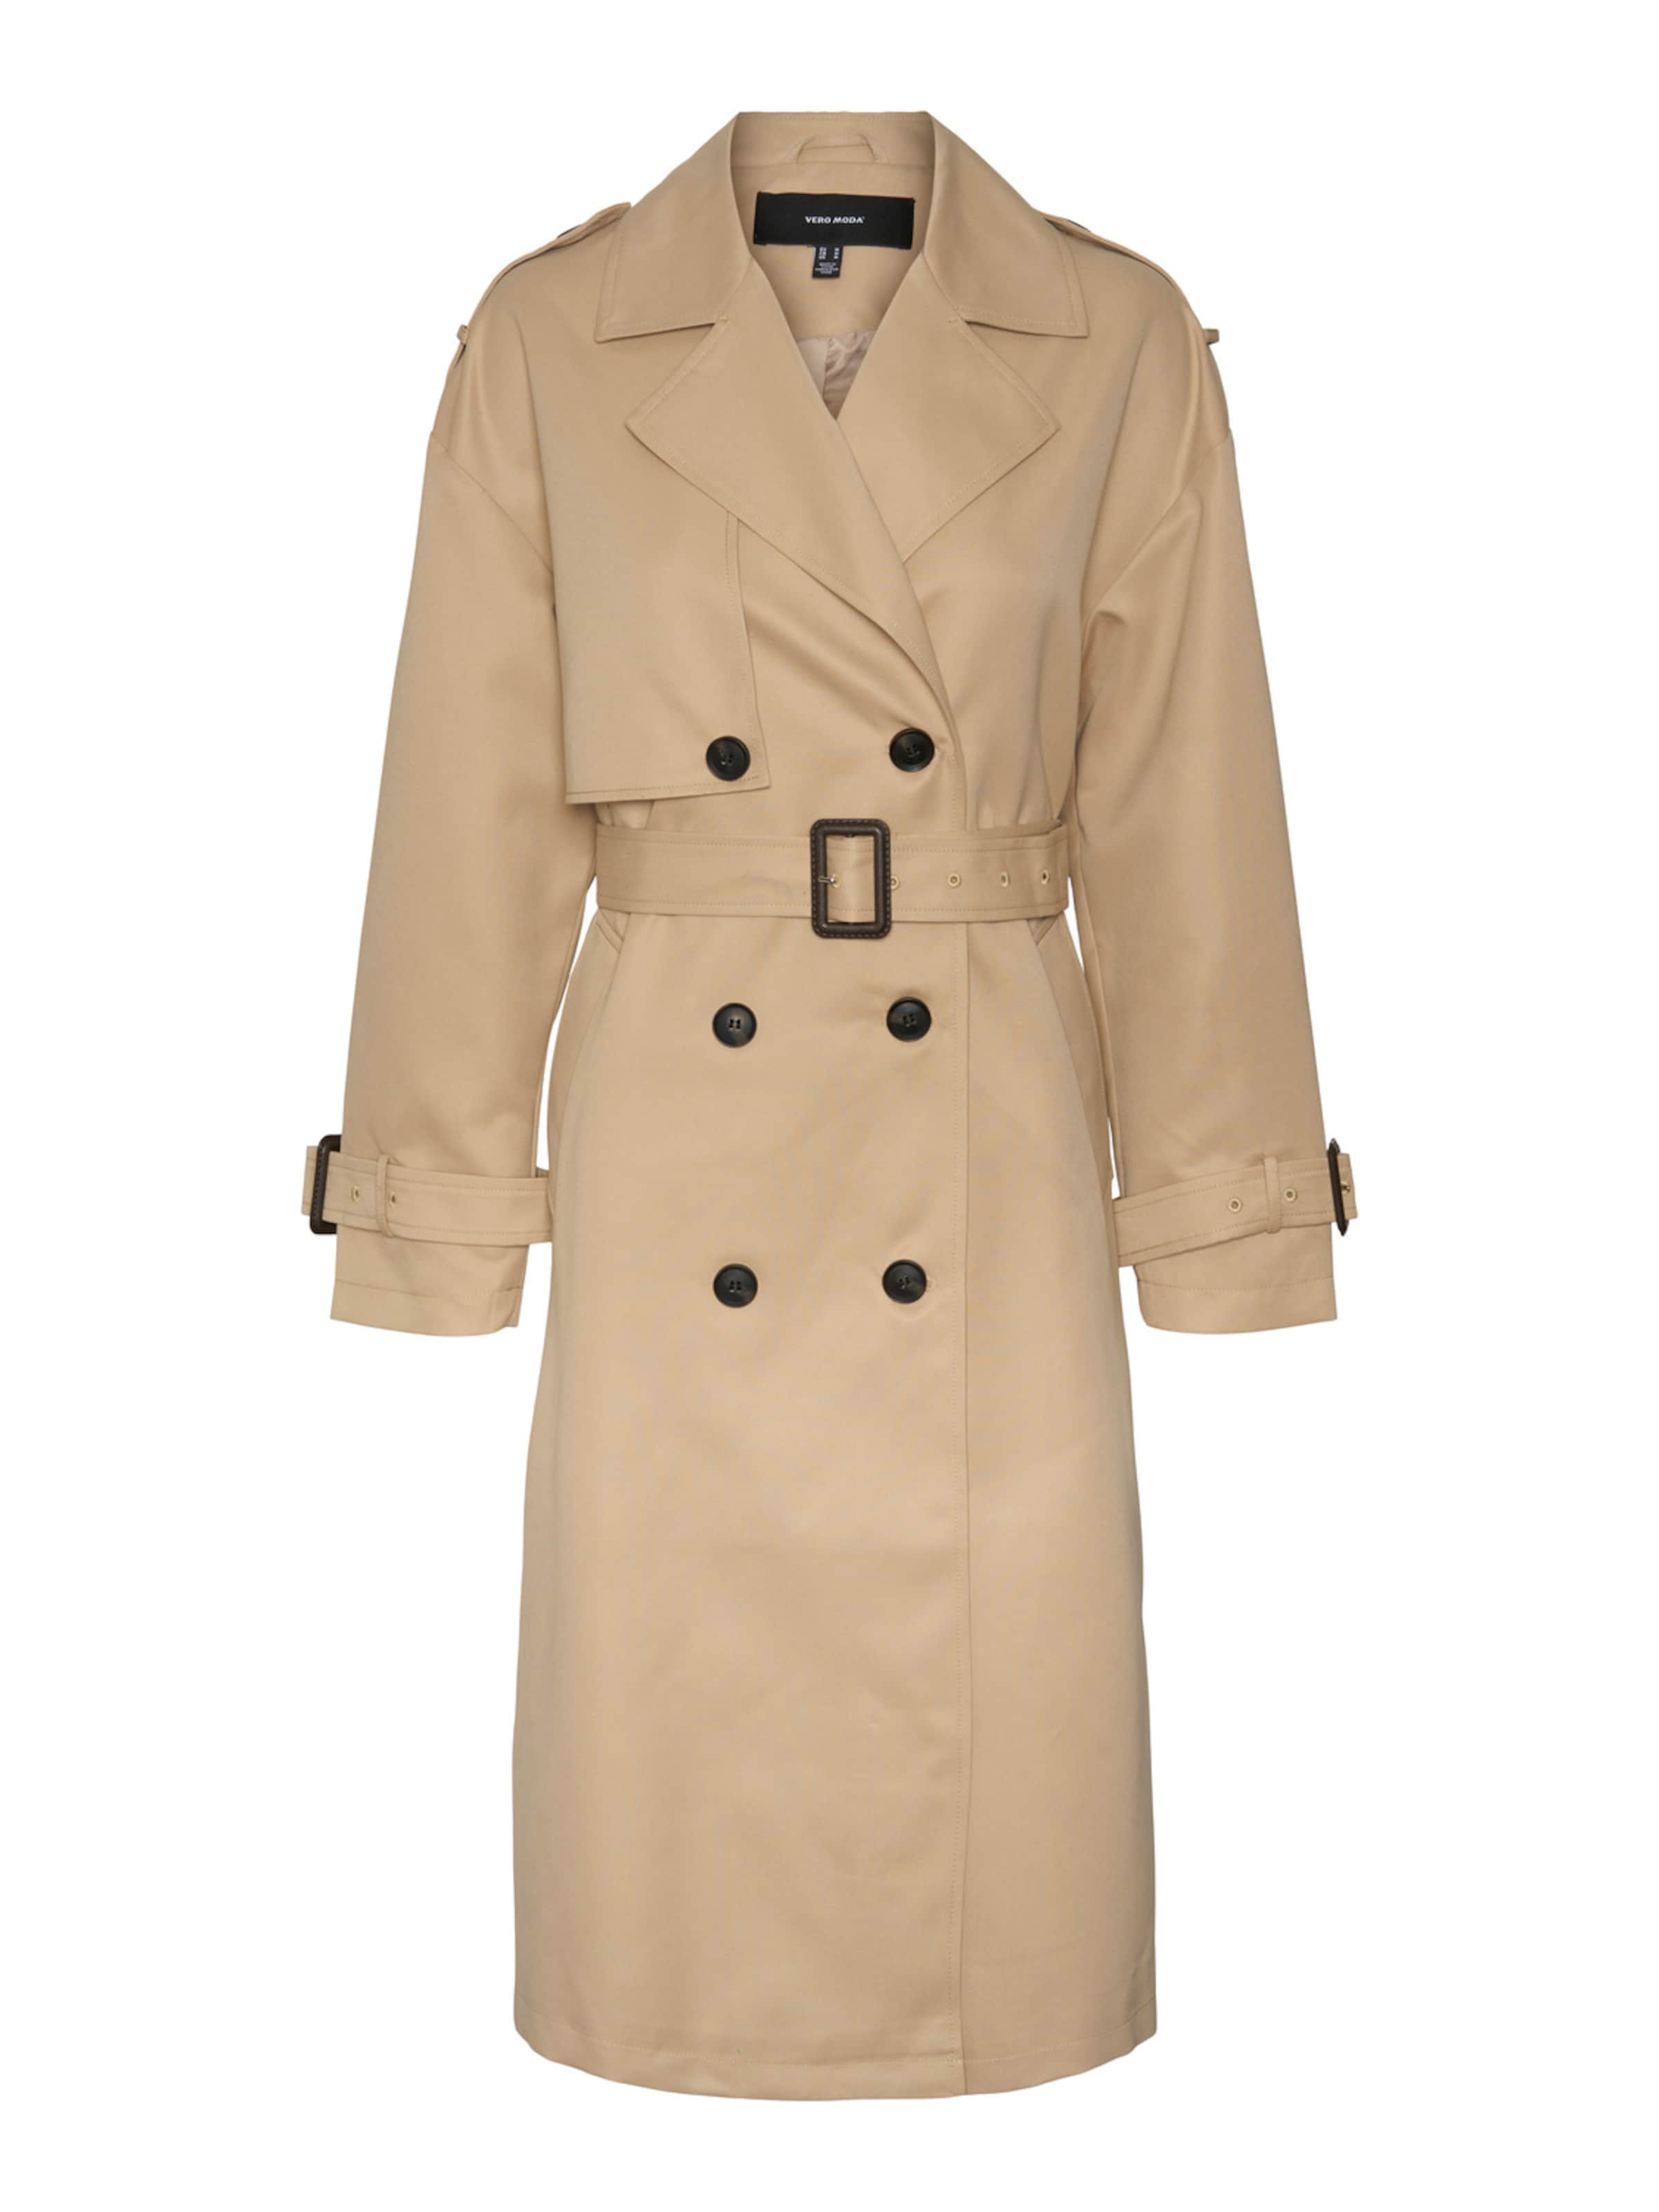 Women's TRENCH - buy online | The Founded